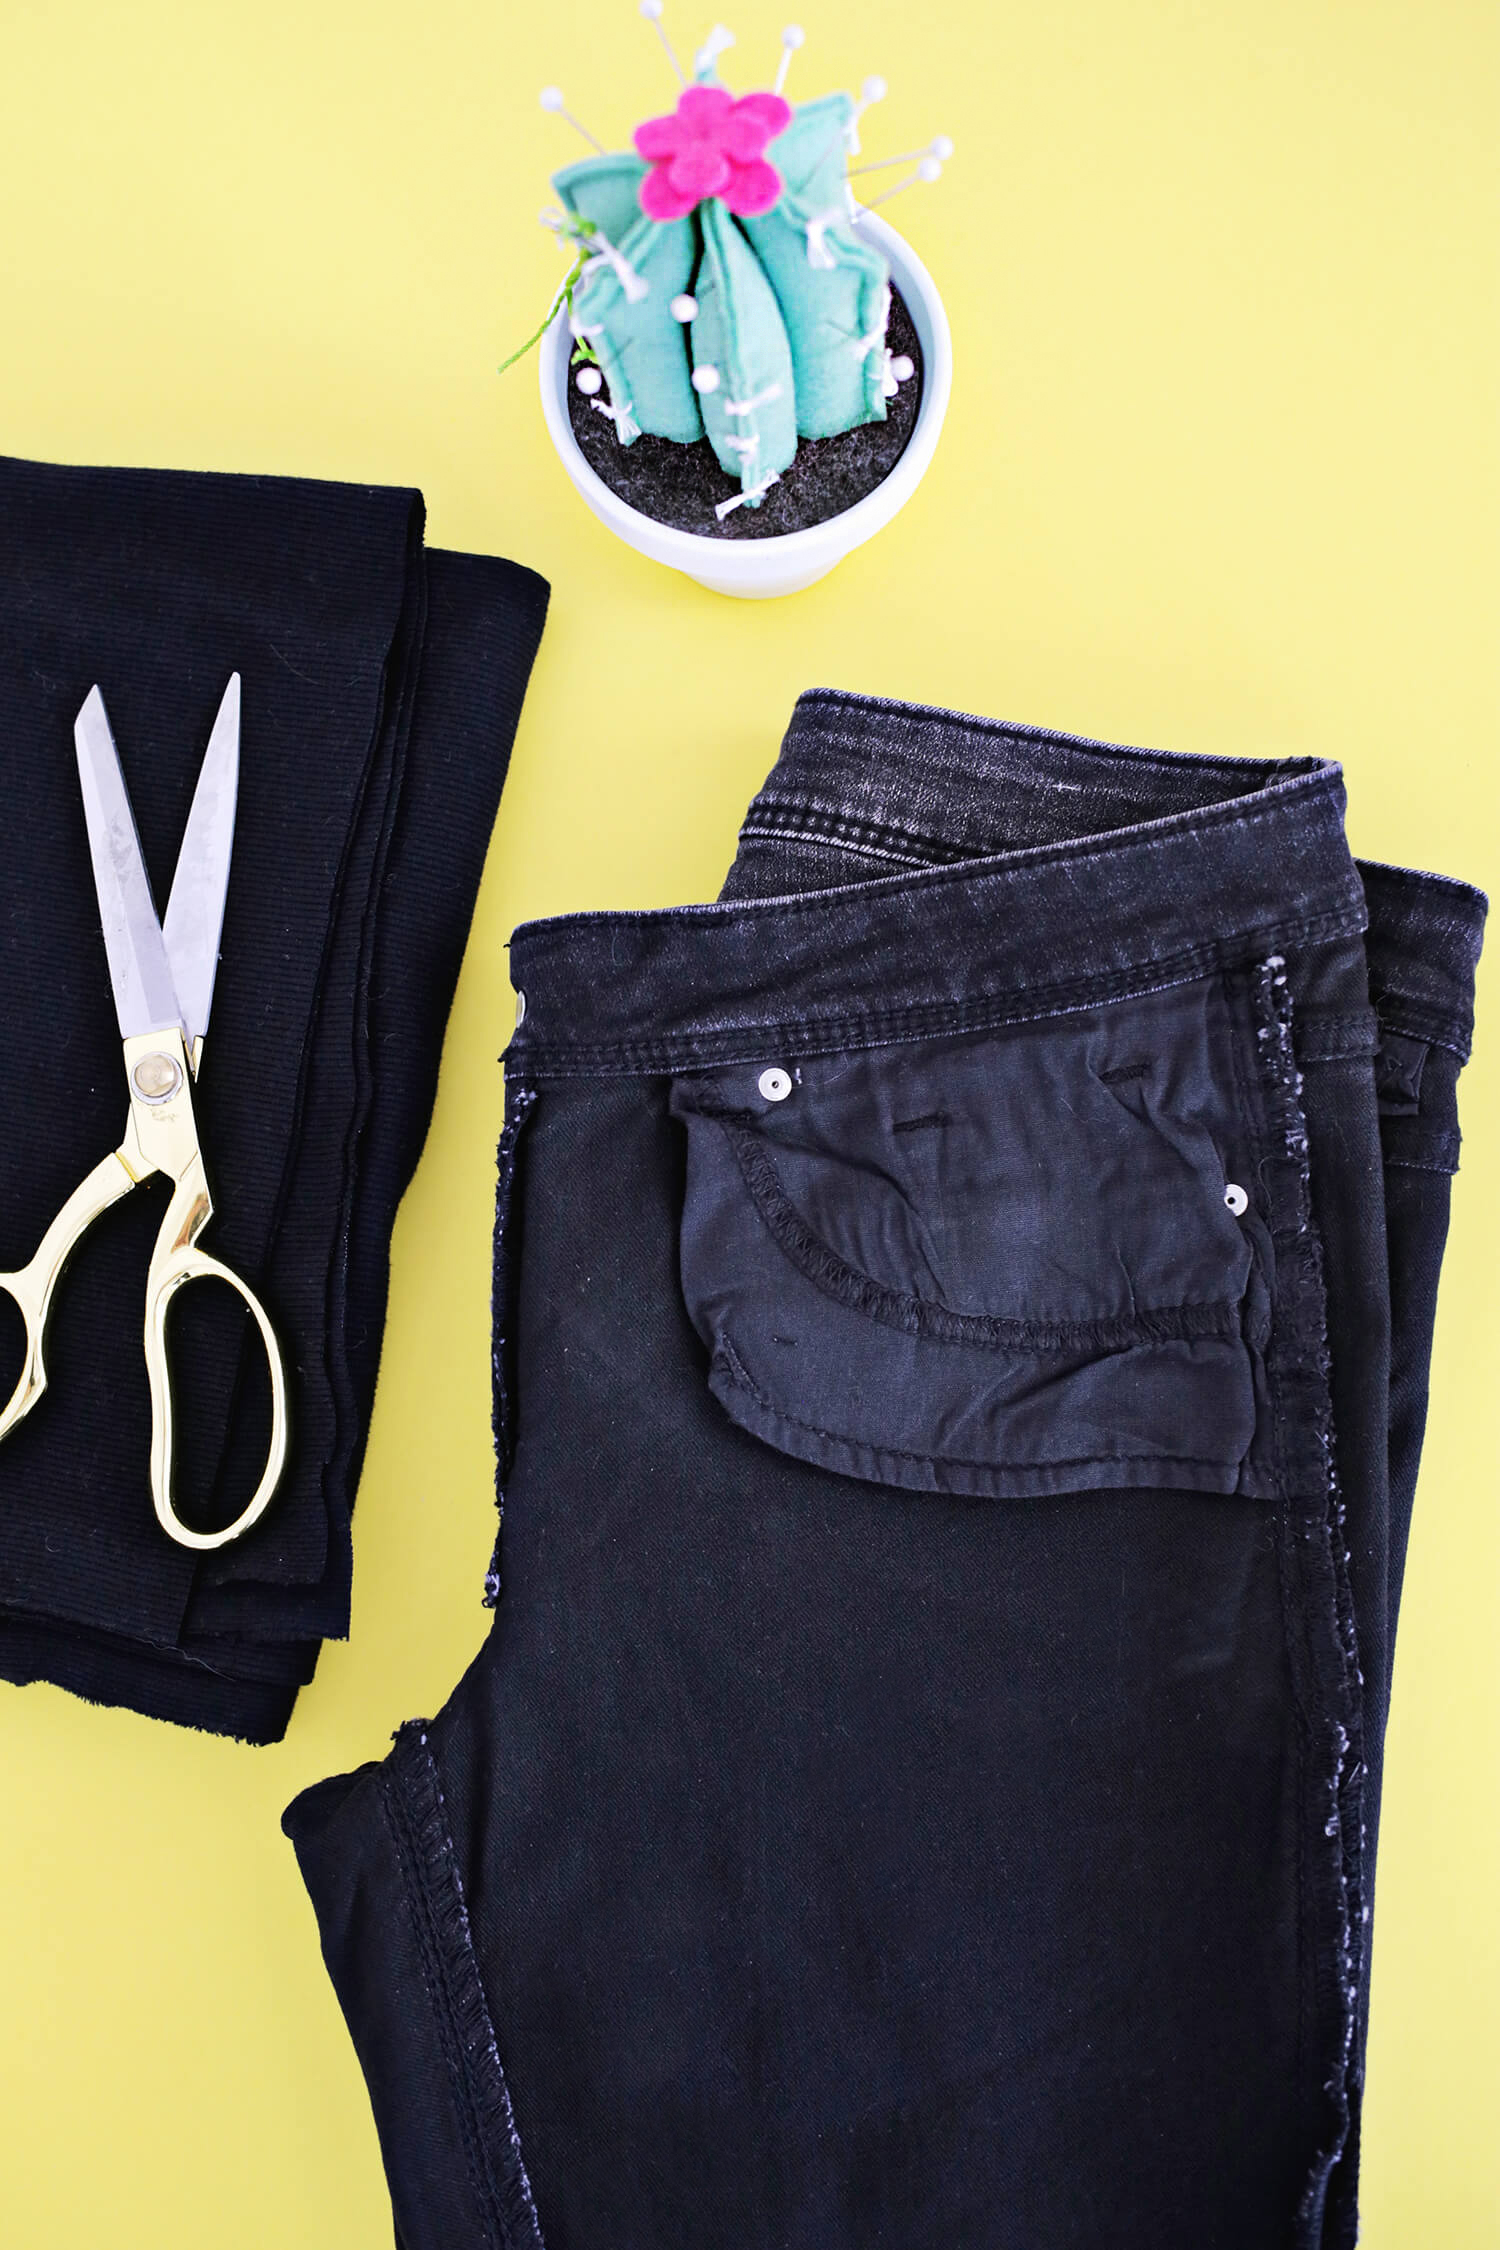 Turn Your Pants Into Maternity Jeans With This Simple DIY (click through for tutorial)